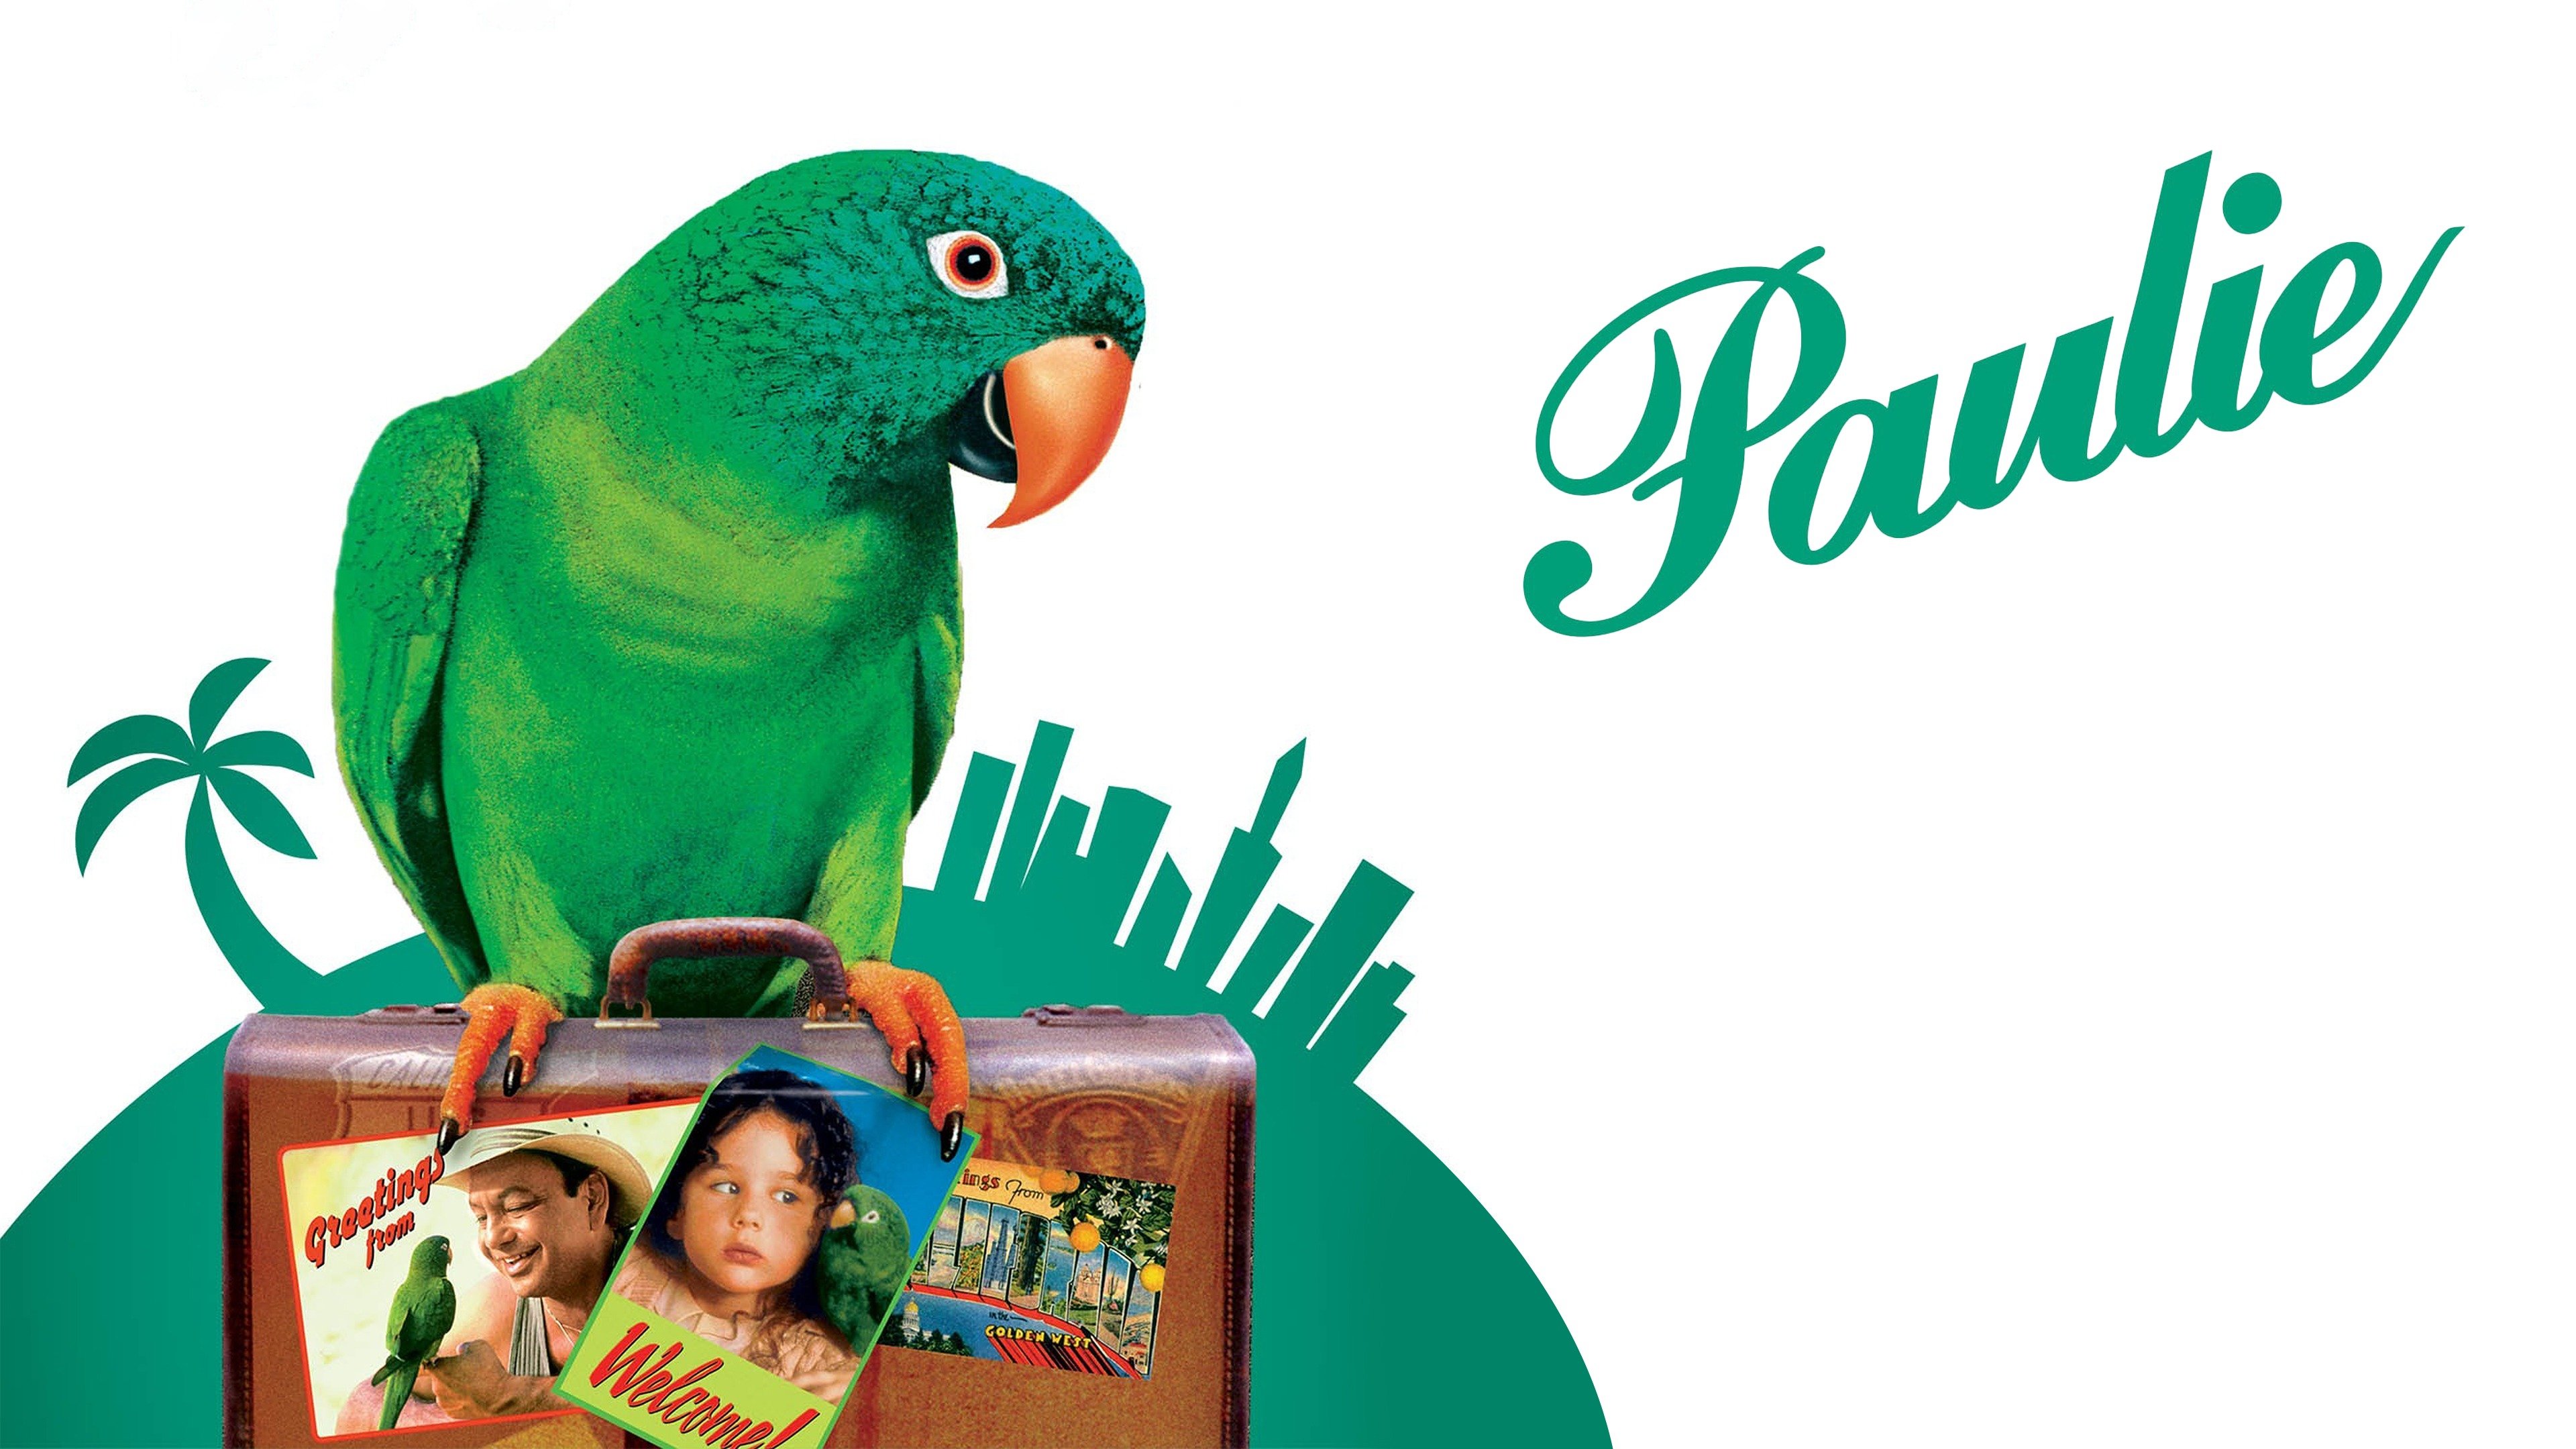 polly parrot movie